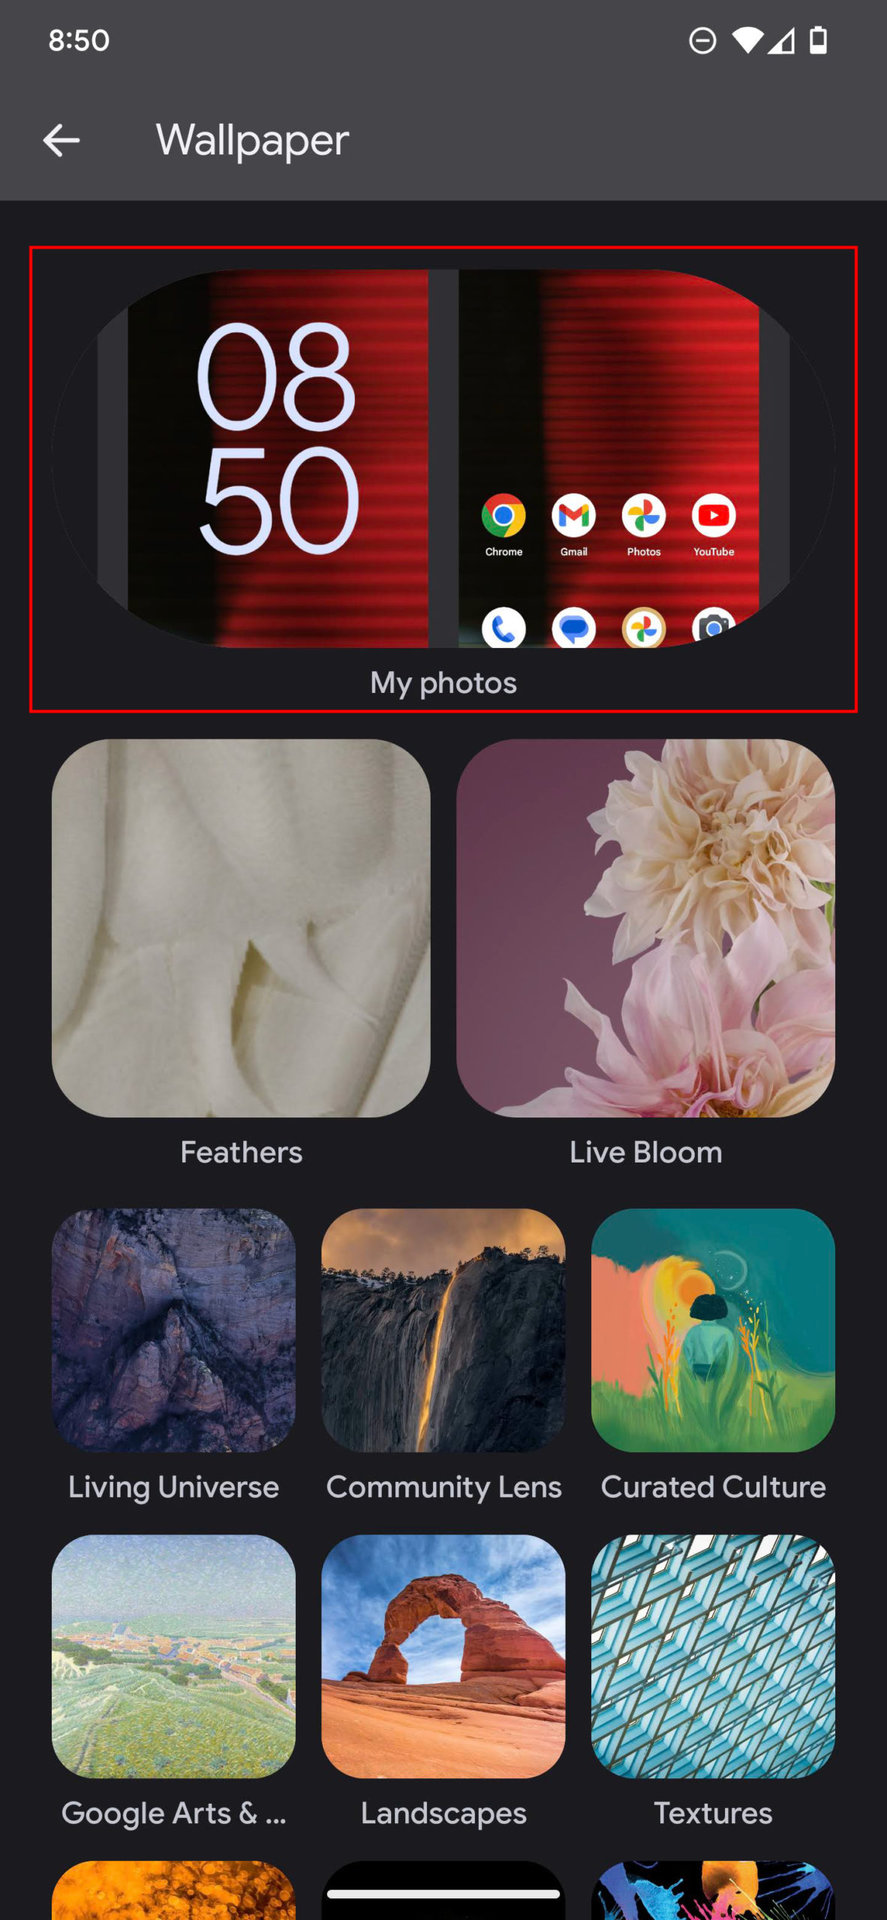 How to set wallpaper on Android 13 3